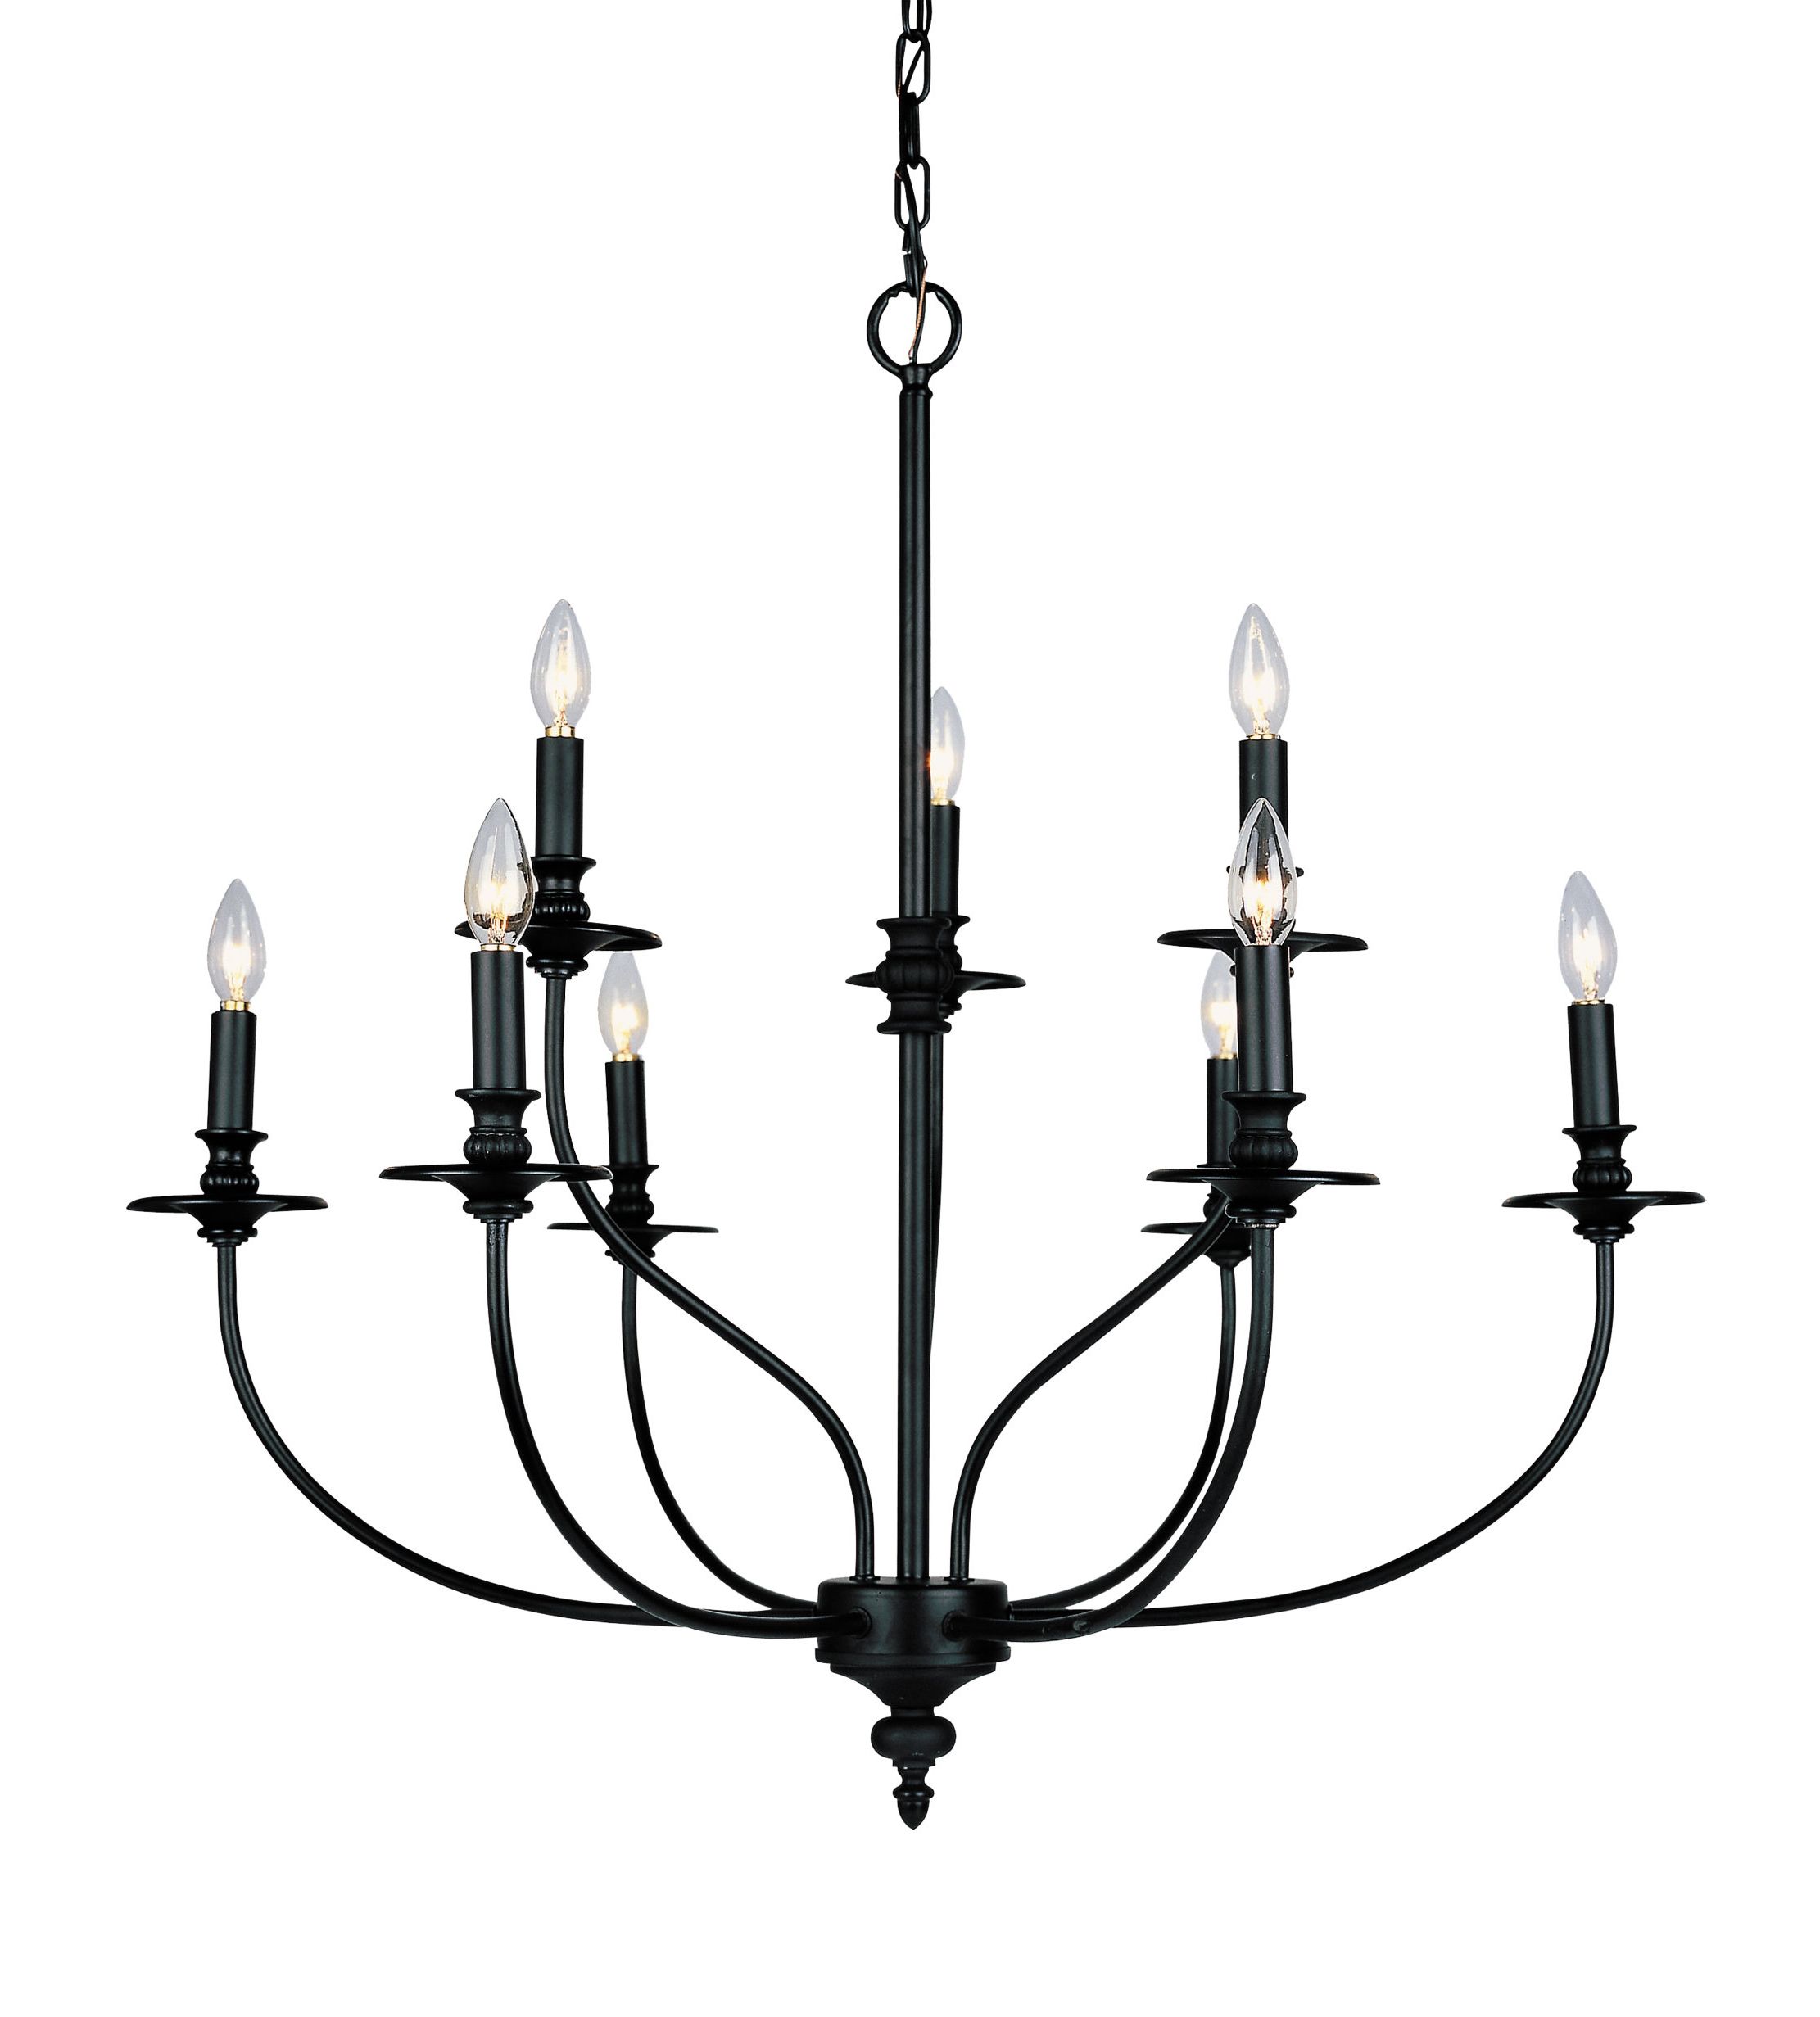 Giverny 9 Light Candle Style Chandeliers With Regard To Preferred Giverny 9 Light Candle Style Chandelier (View 1 of 20)